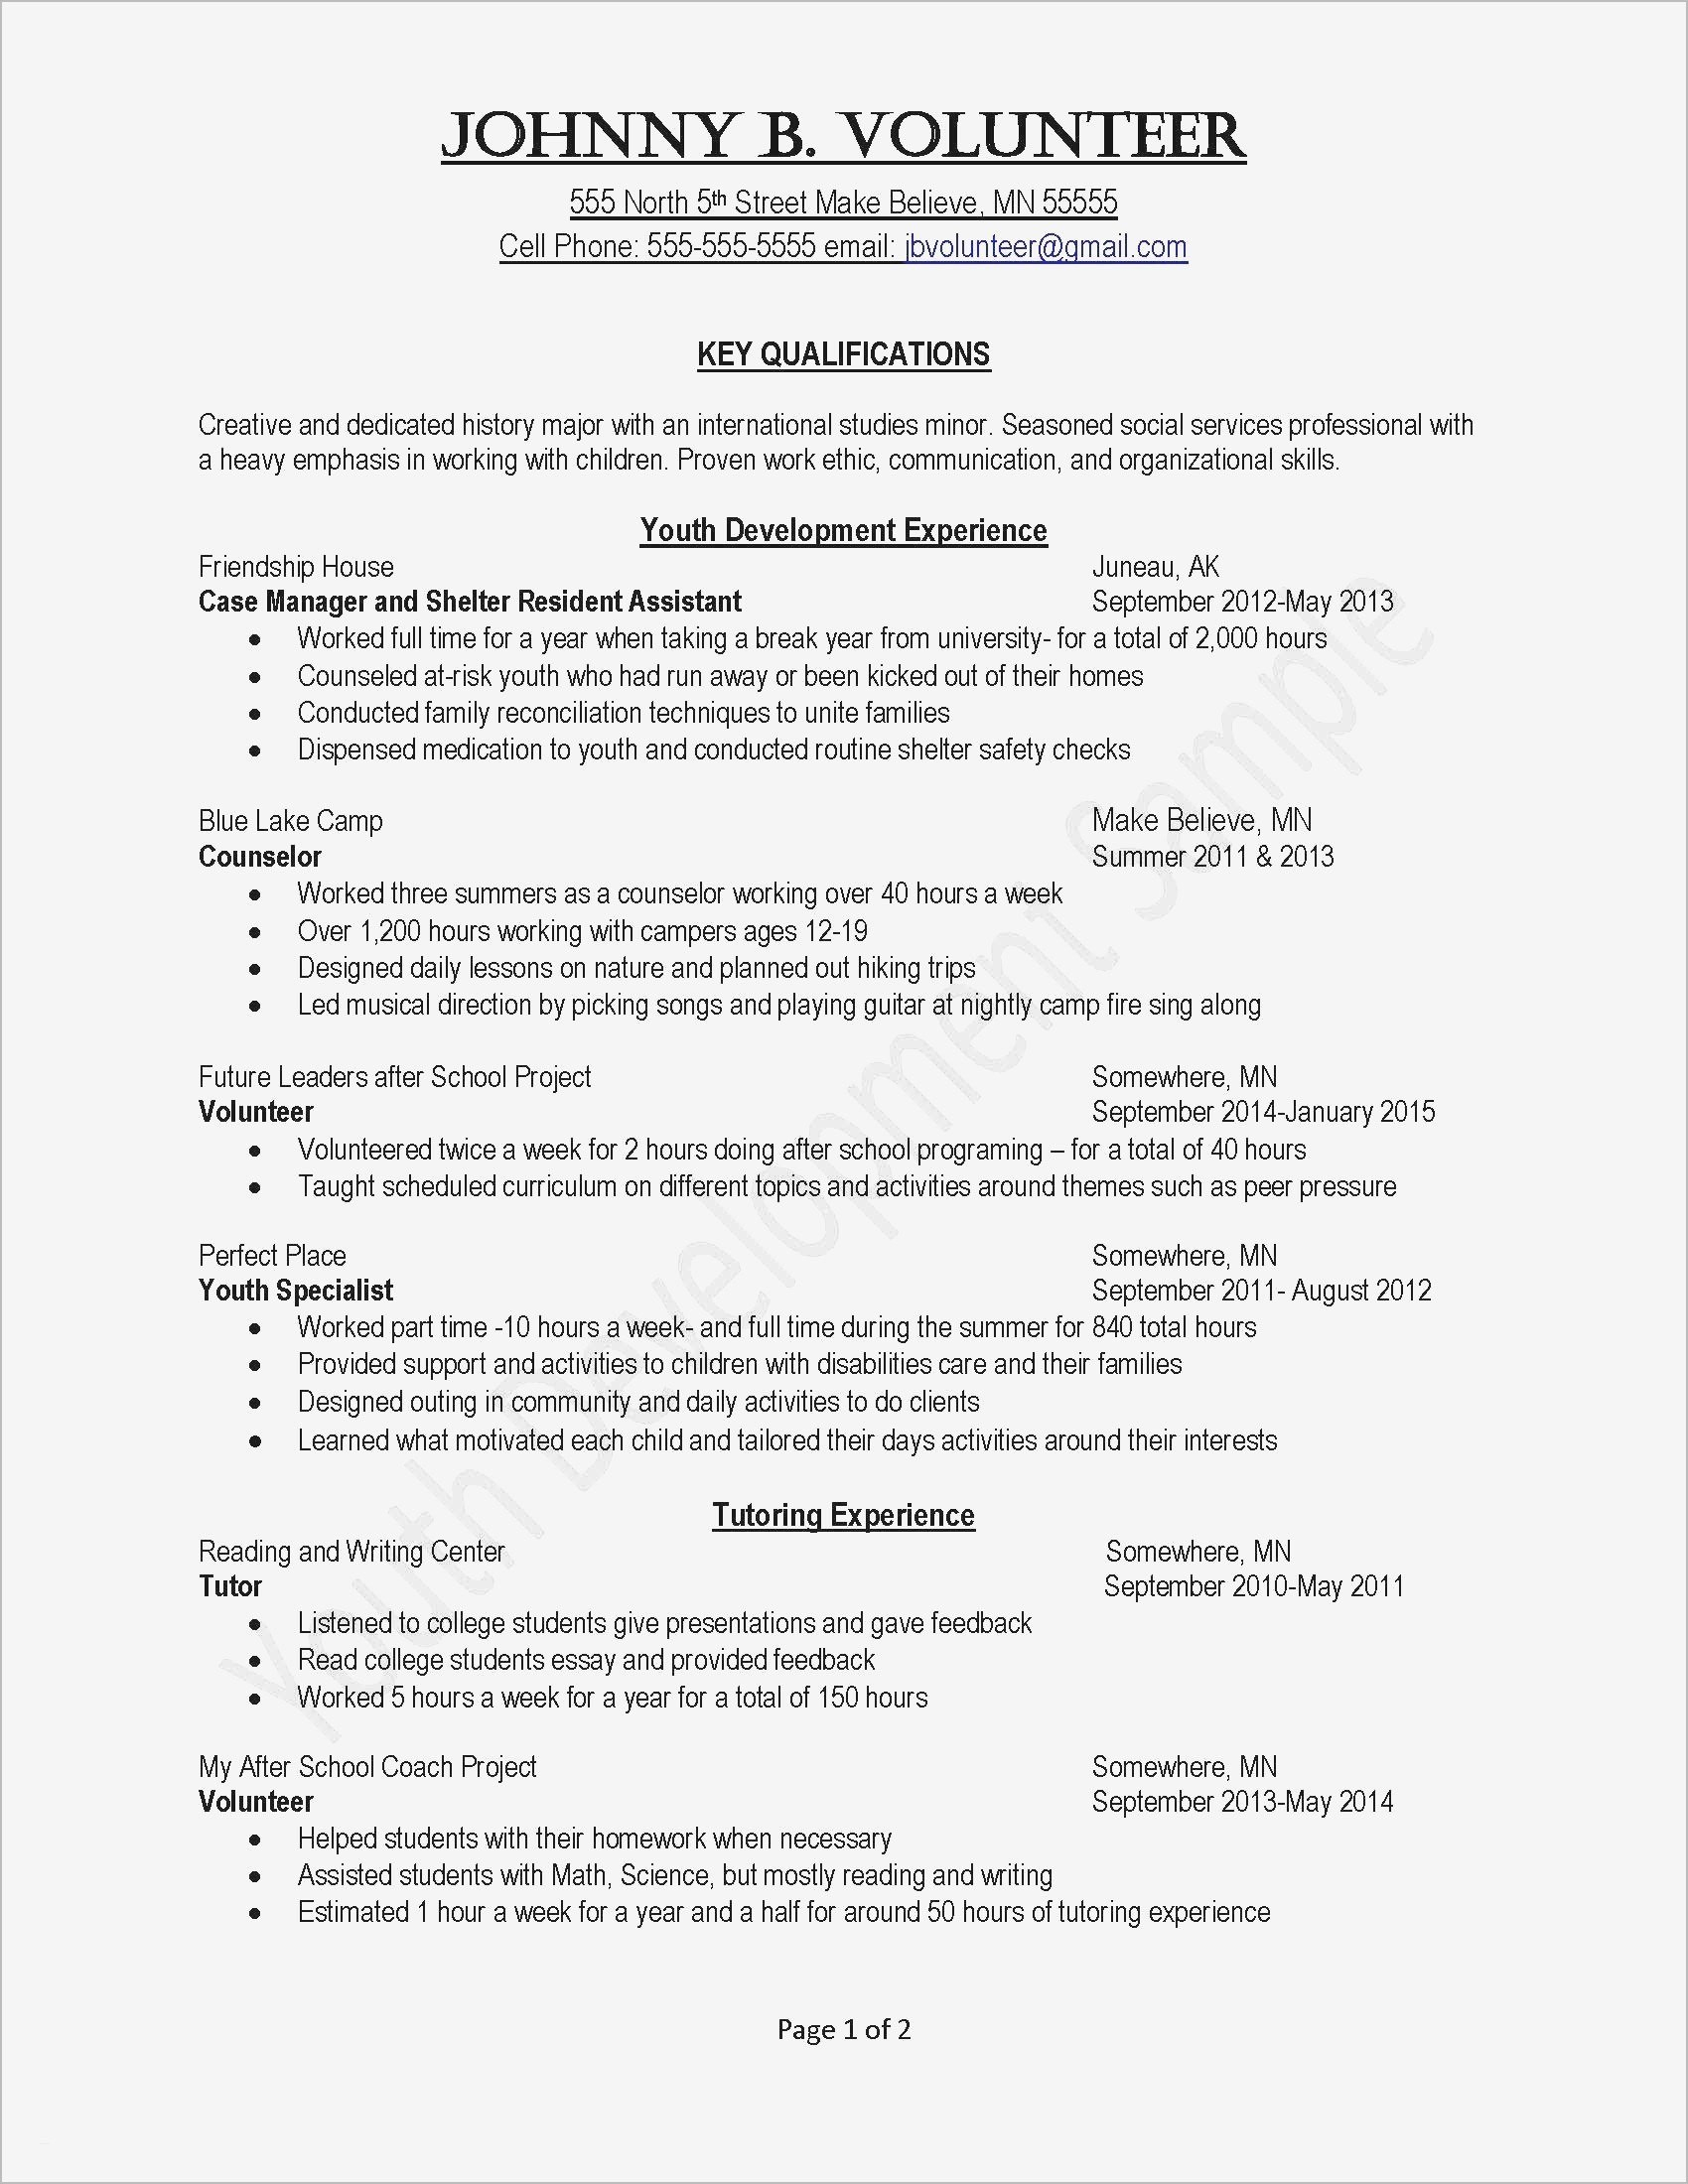 Cover Letter Template Fill In - Resume Template Free Fill In New Job Fer Letter Template Us Copy Od